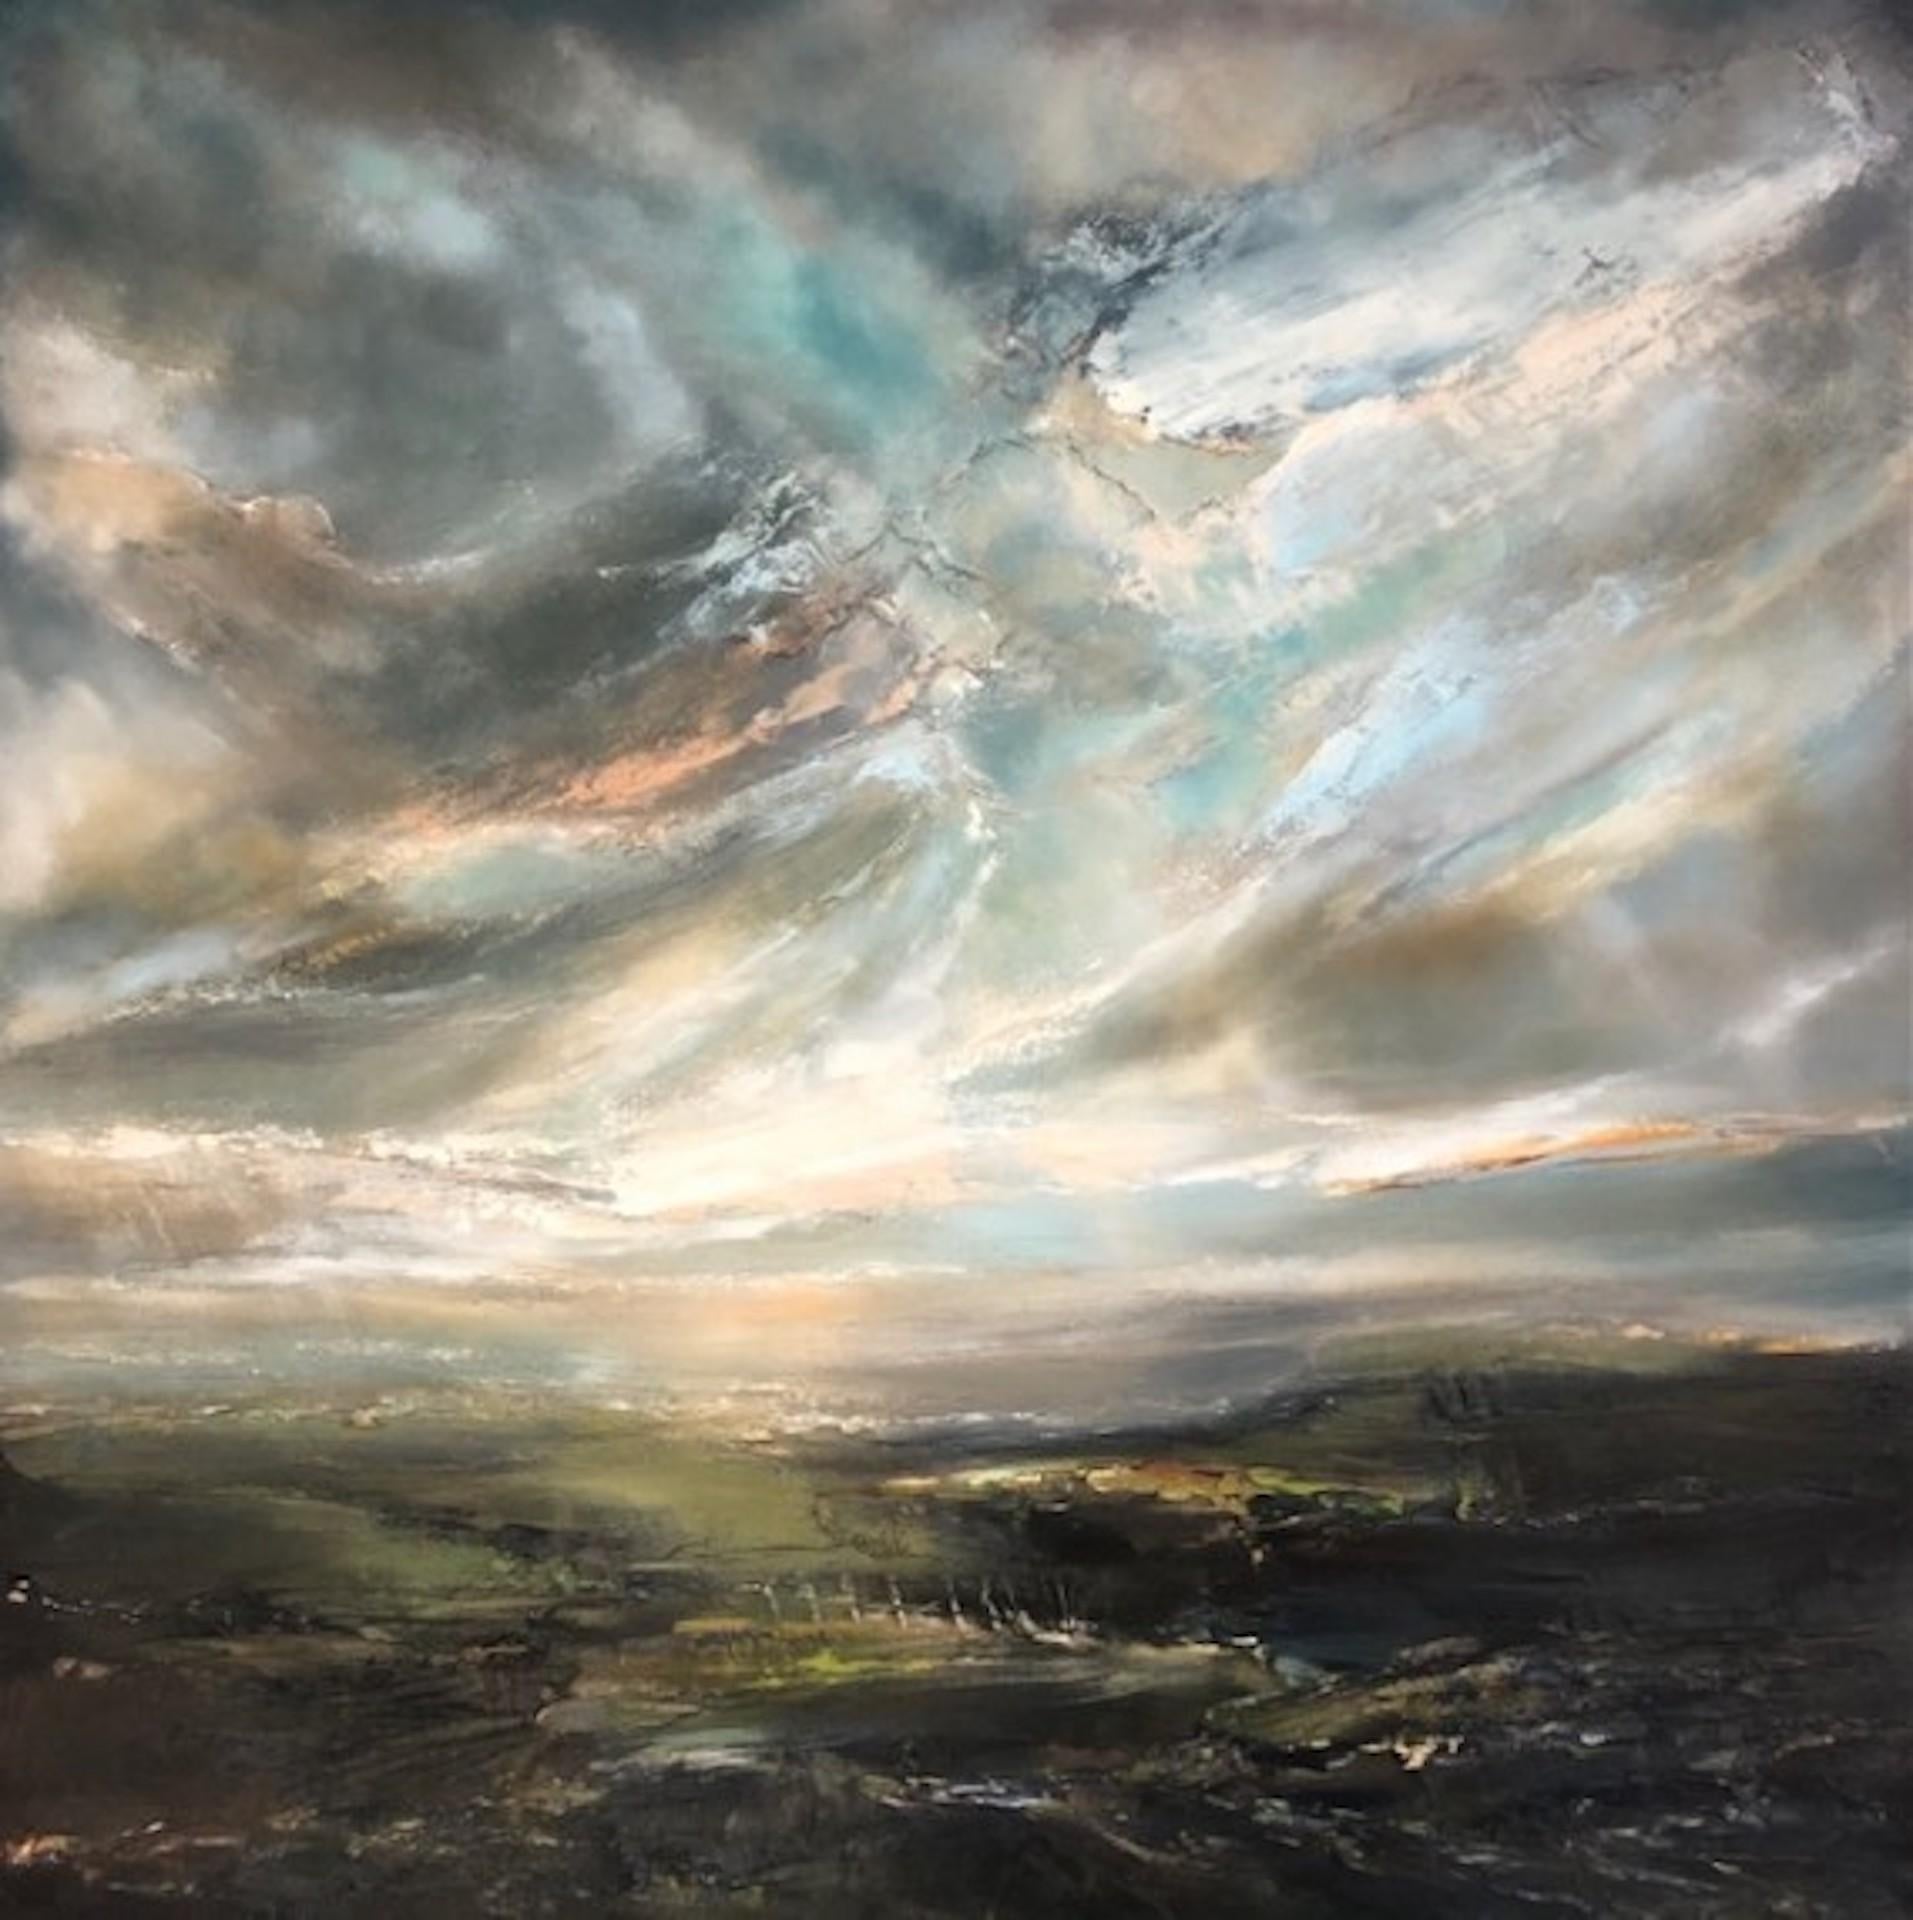 Spring Awakens [2021]
Original
Landscape
Oil on Canvas
Complete Size of Unframed Work: H:91 cm x W:91 cm x D:3.5cm
Sold Unframed
Please note that insitu images are purely an indication of how a piece may look

'Spring Awakens' is an original